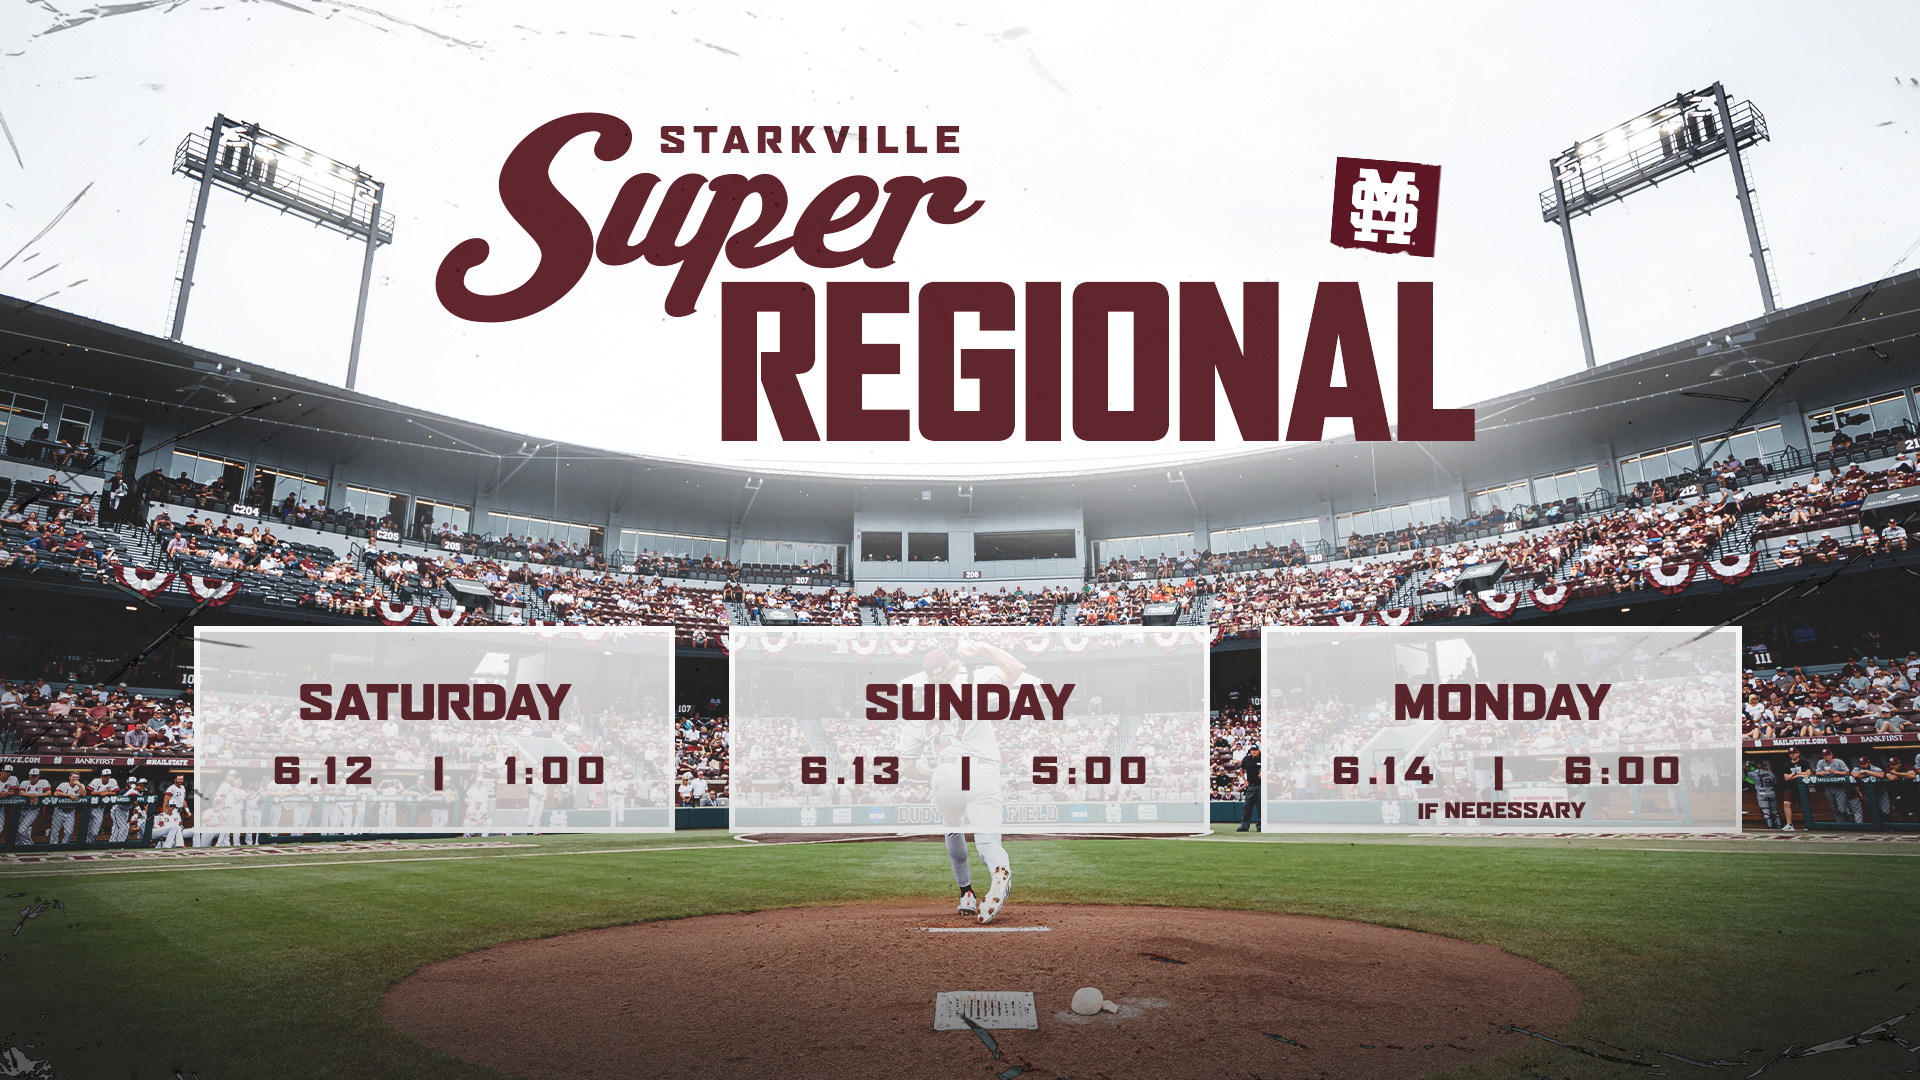 Starkville Super Regional schedule graphic with a view from the pitcher's mound of packed stands at Dudy Noble Field